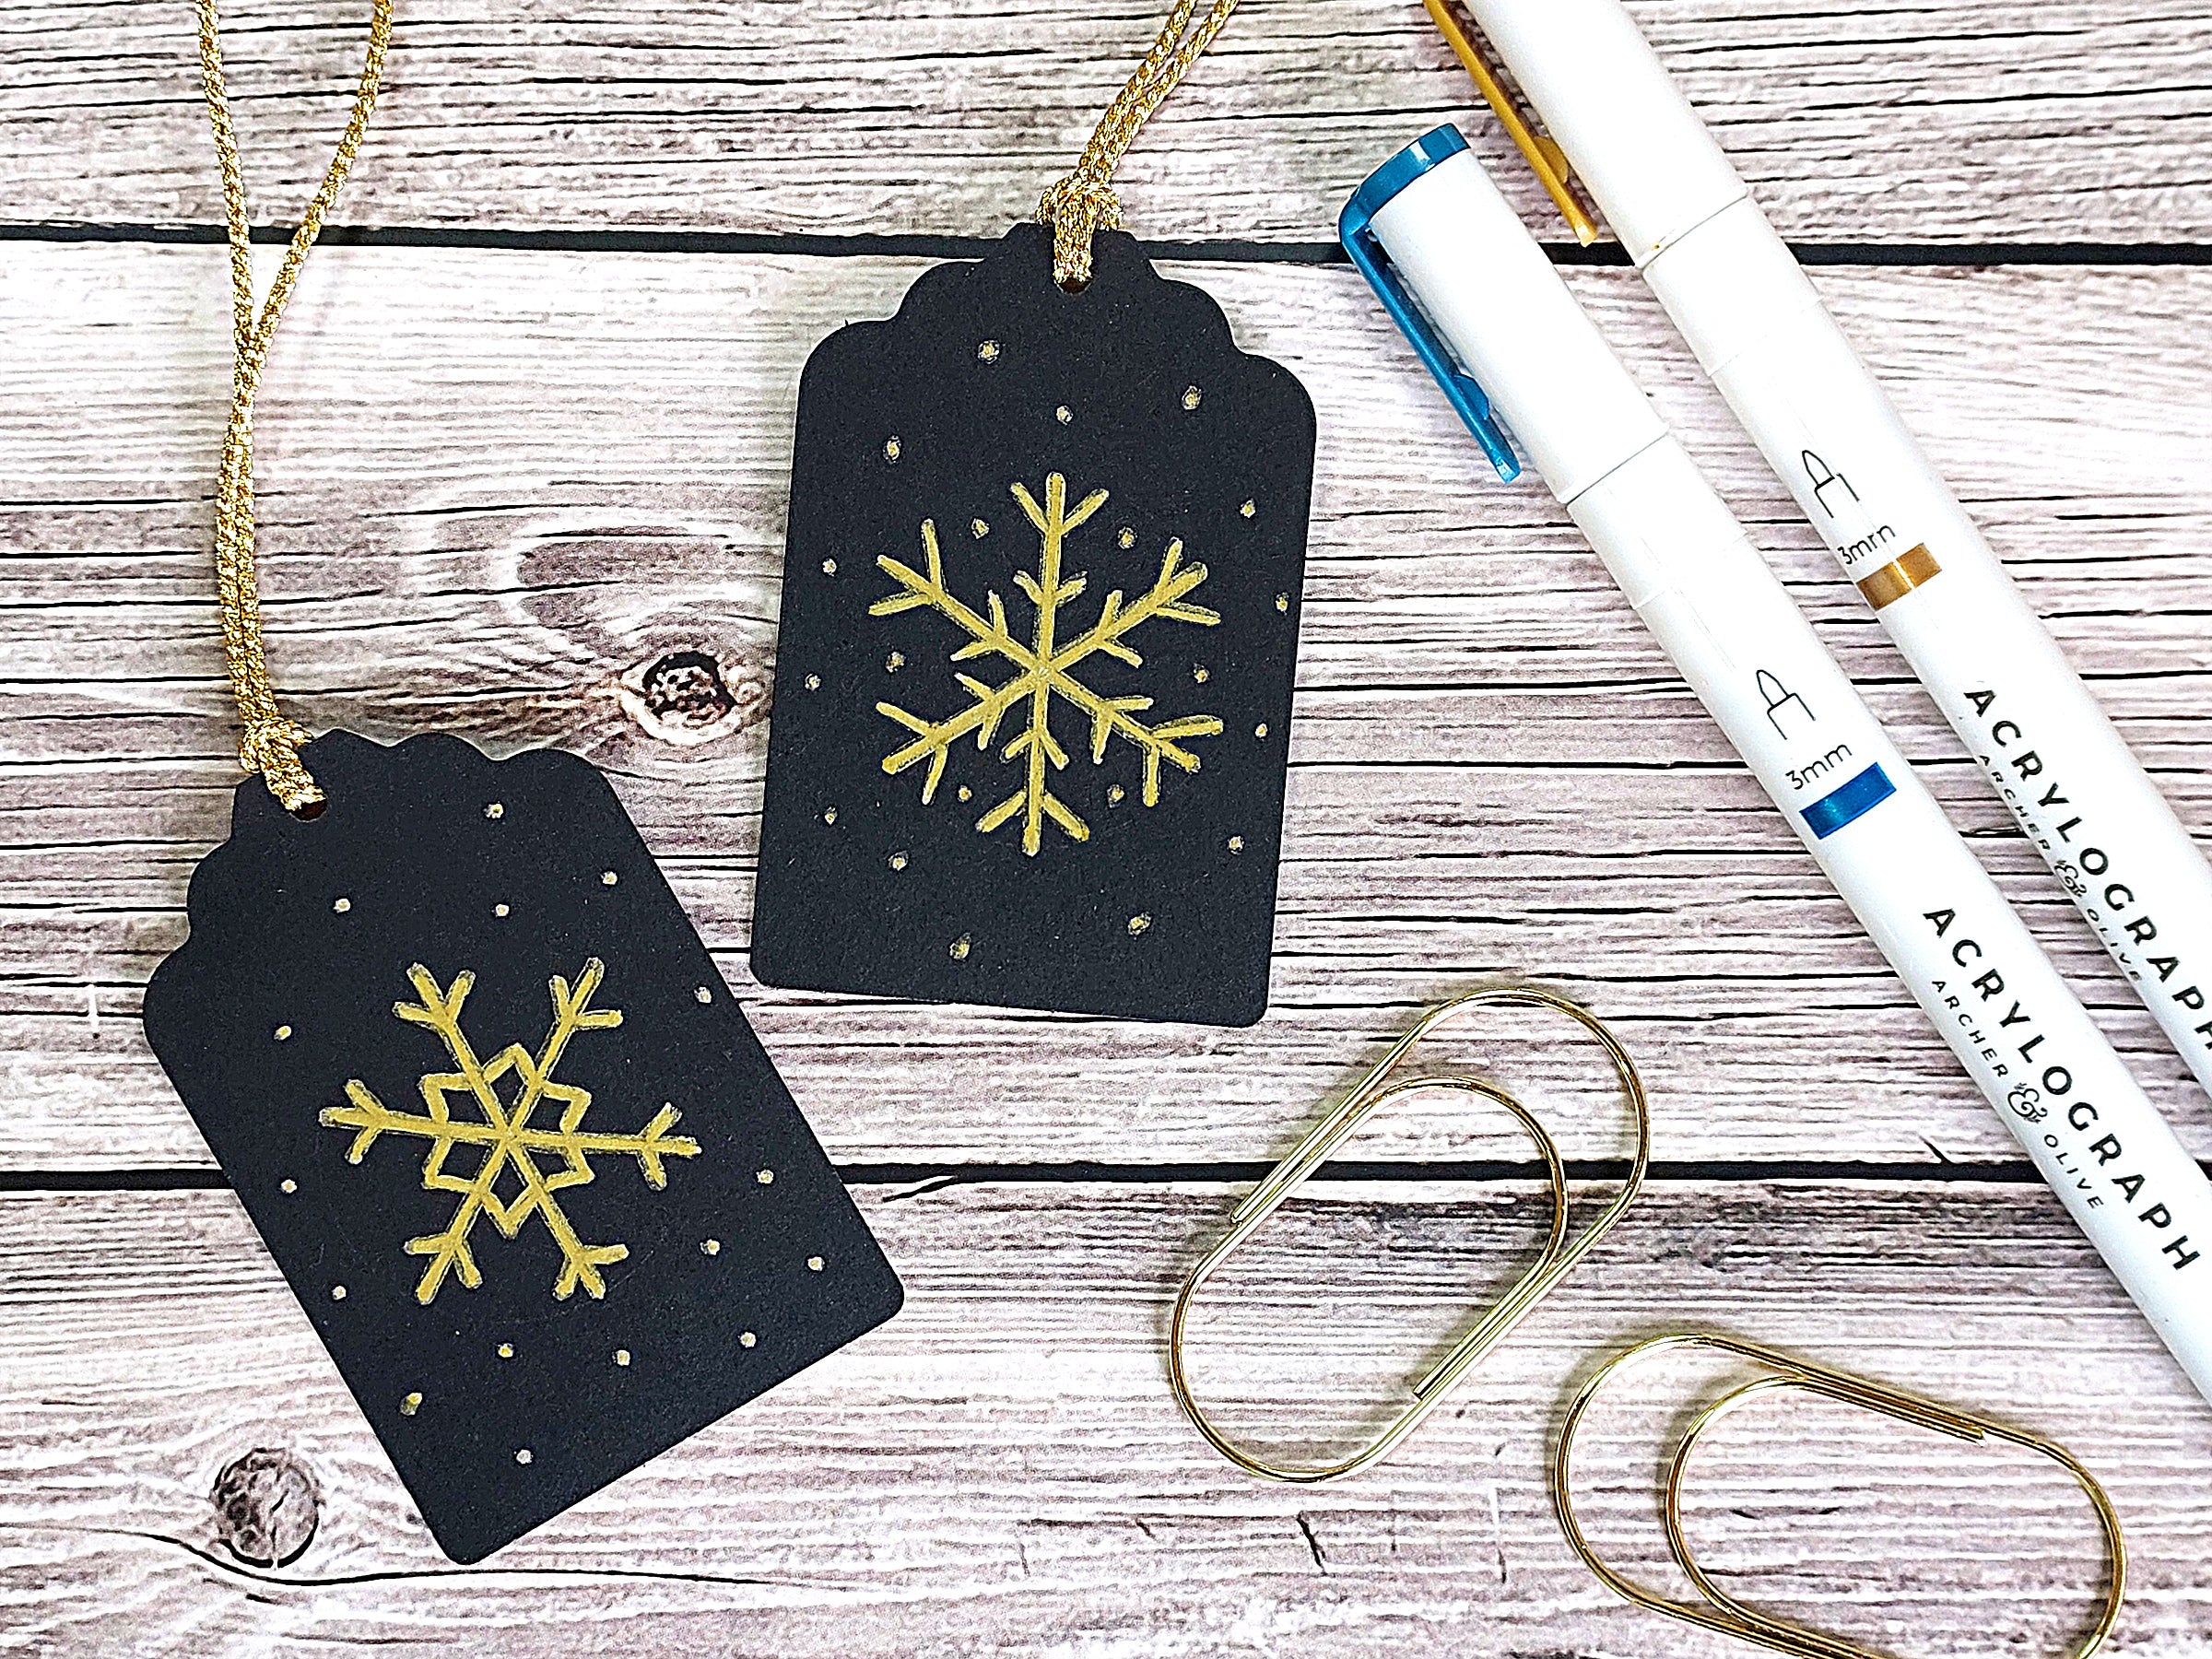 Snowflake decorated gift tags